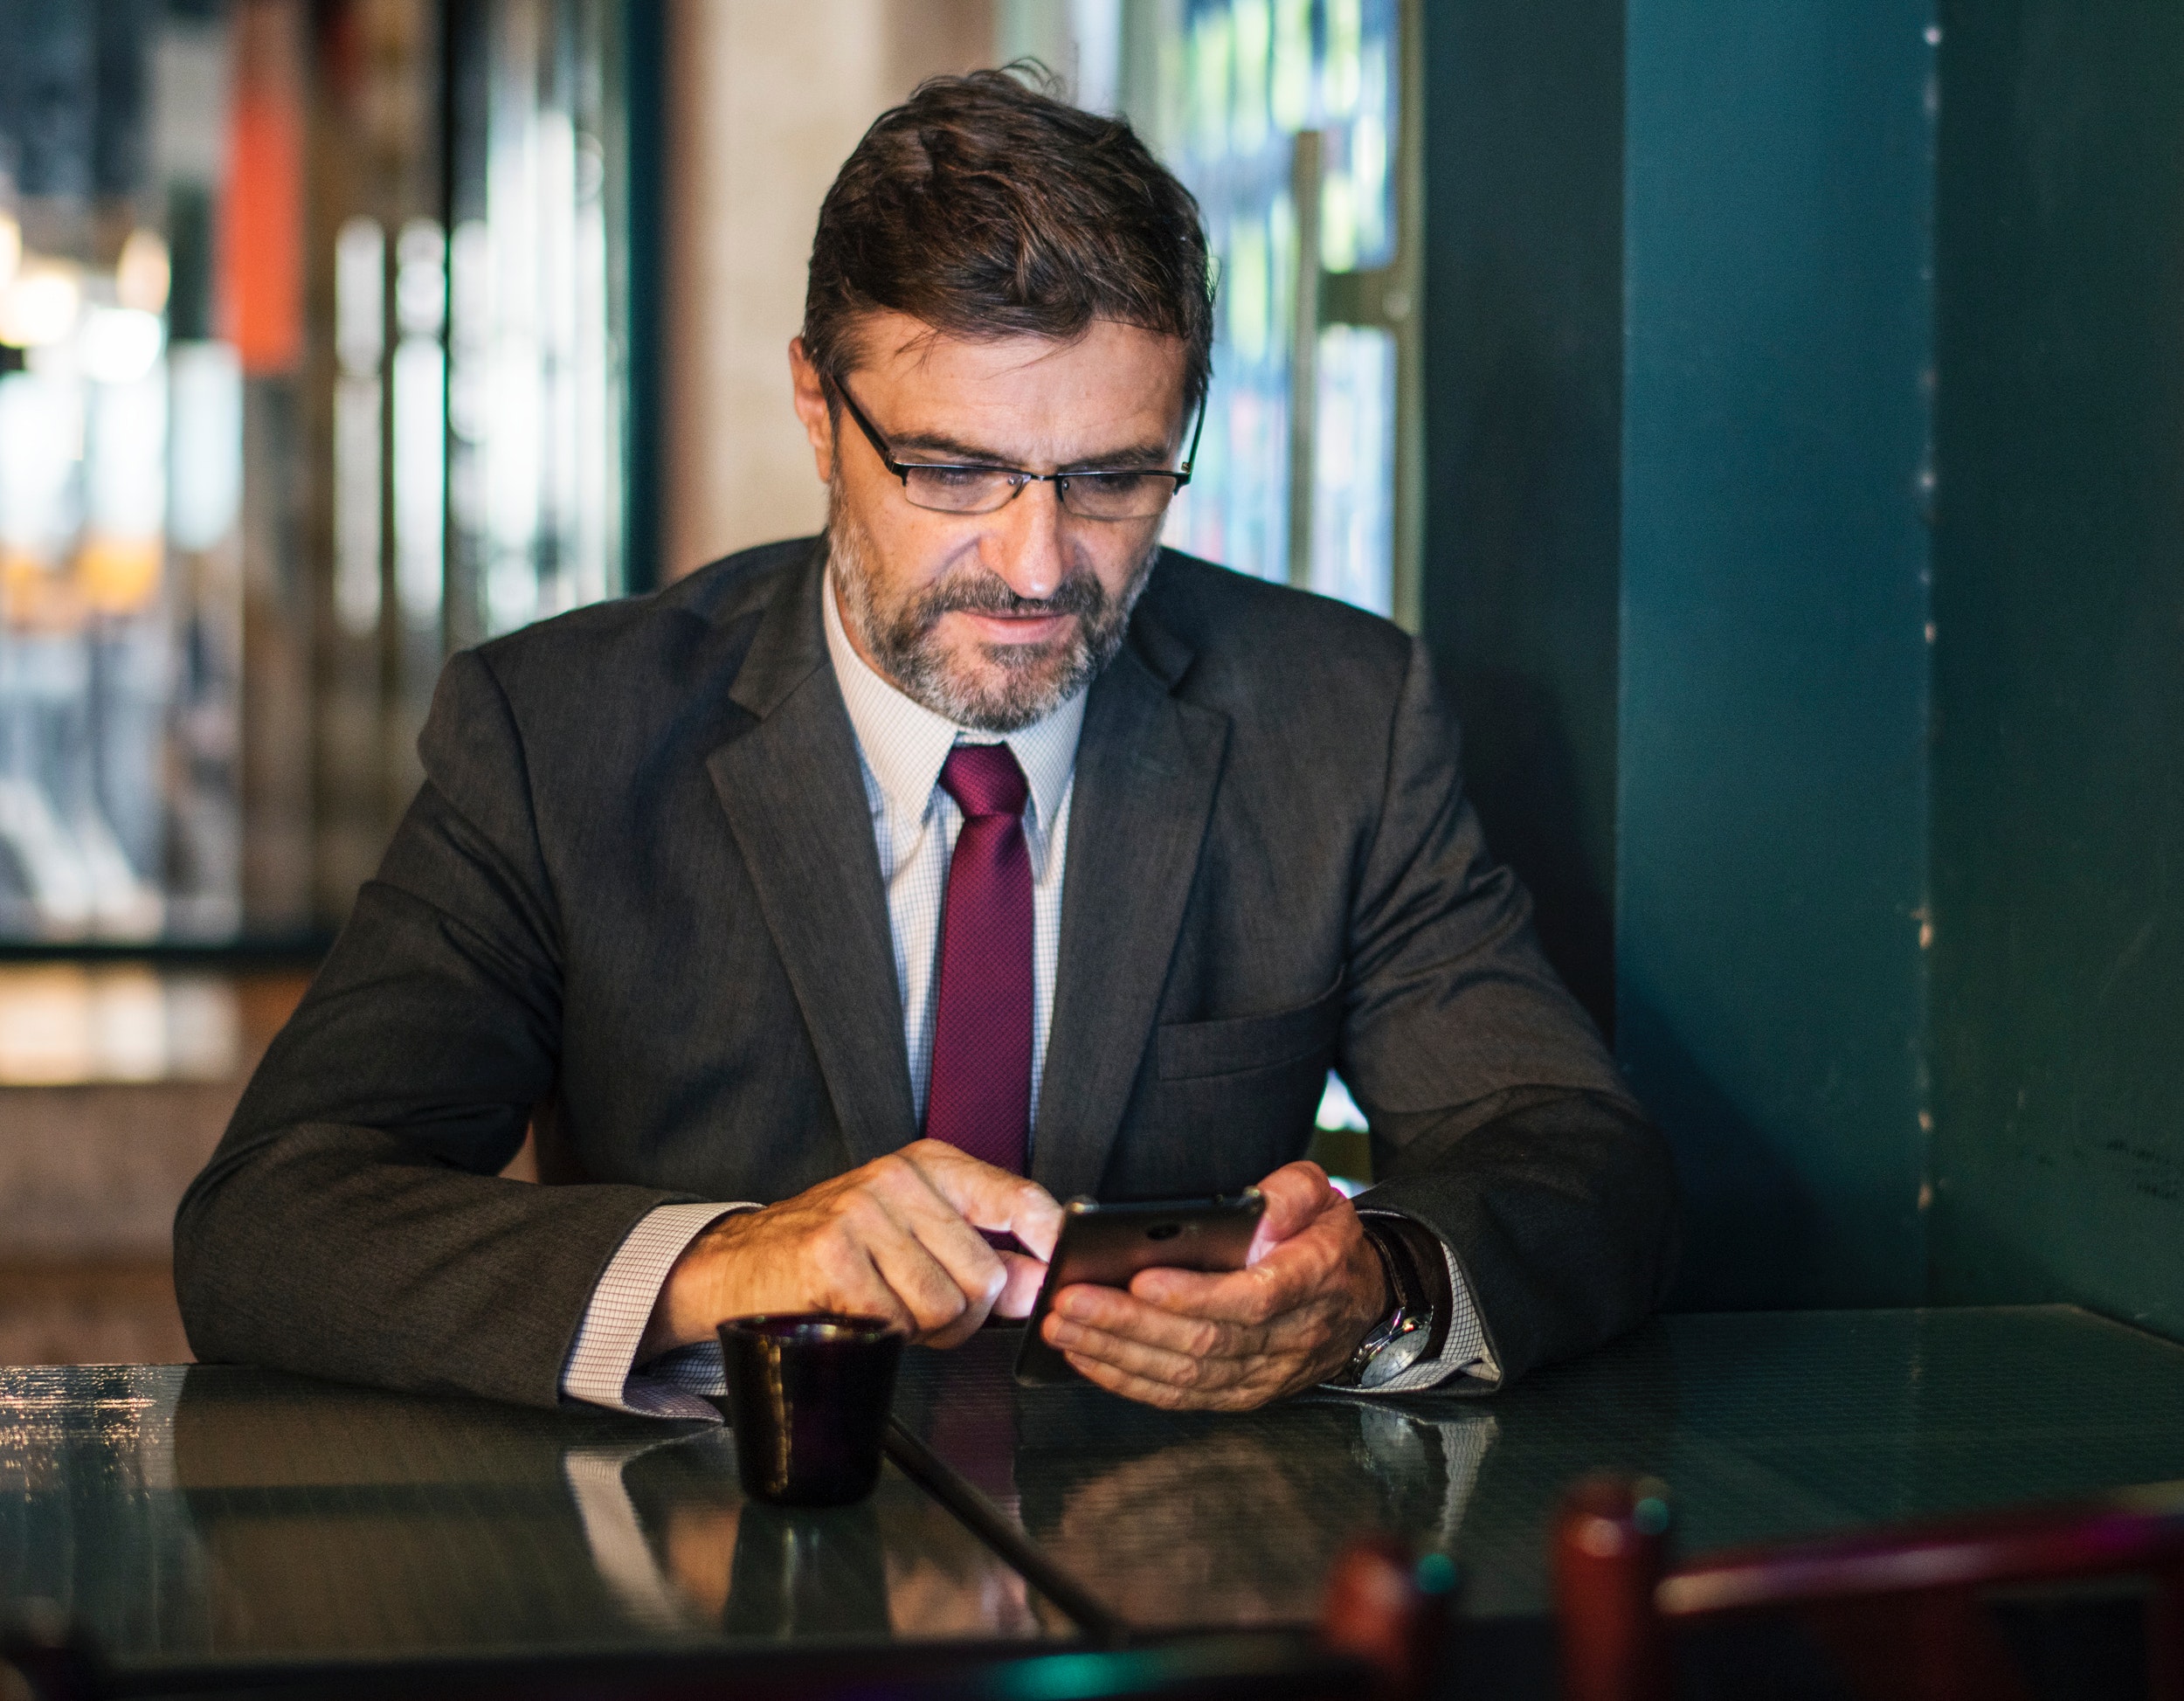 business man on his smartphone at a restaurant